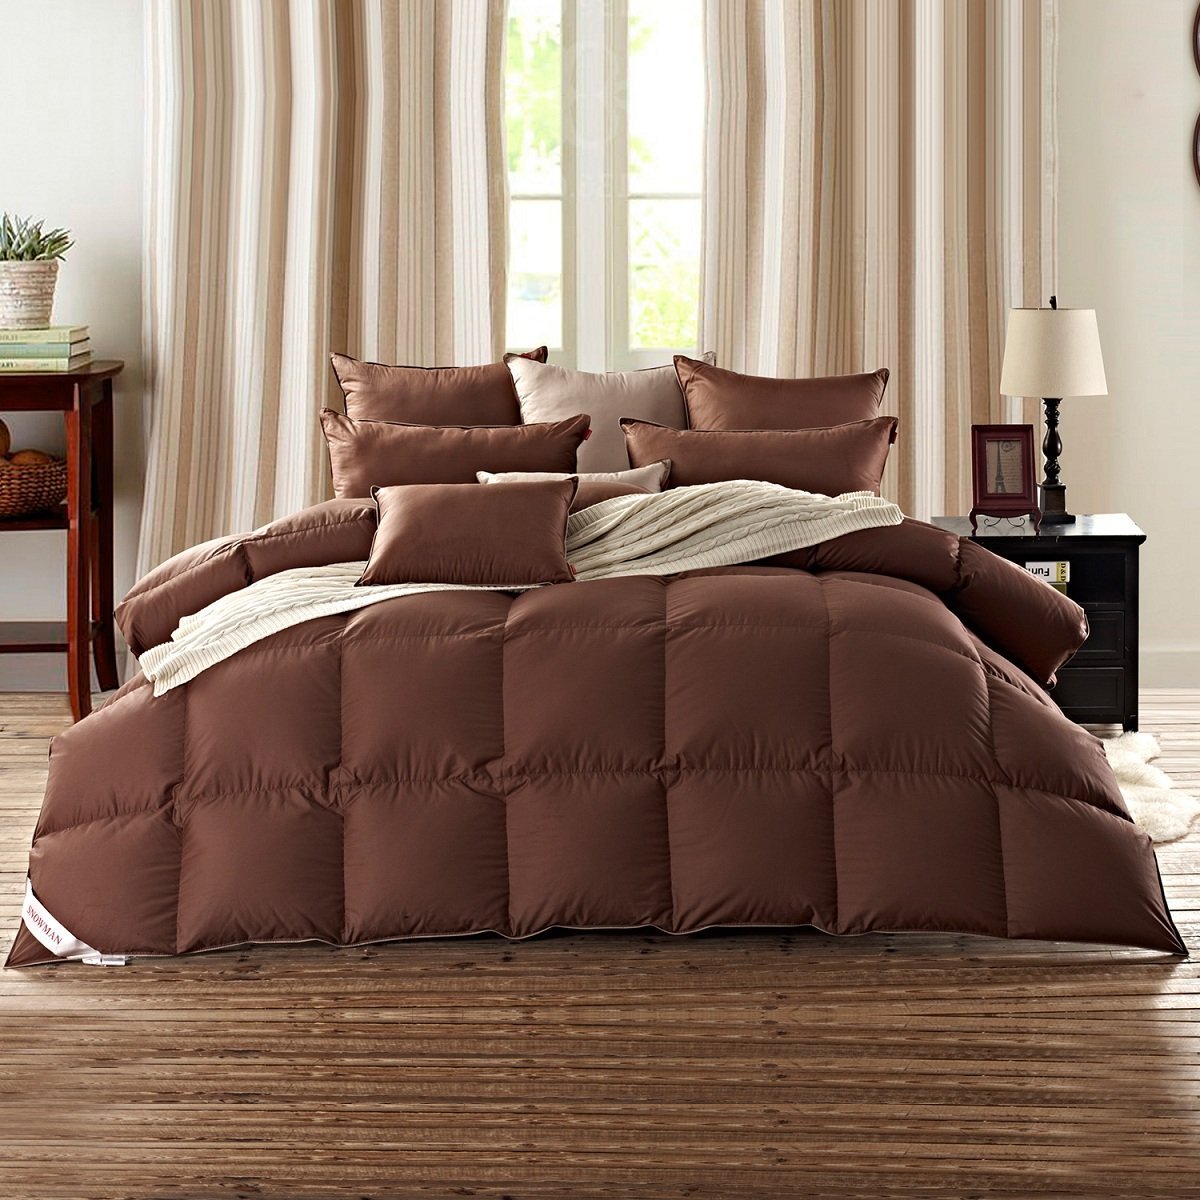 4 Cheap brown down comforters